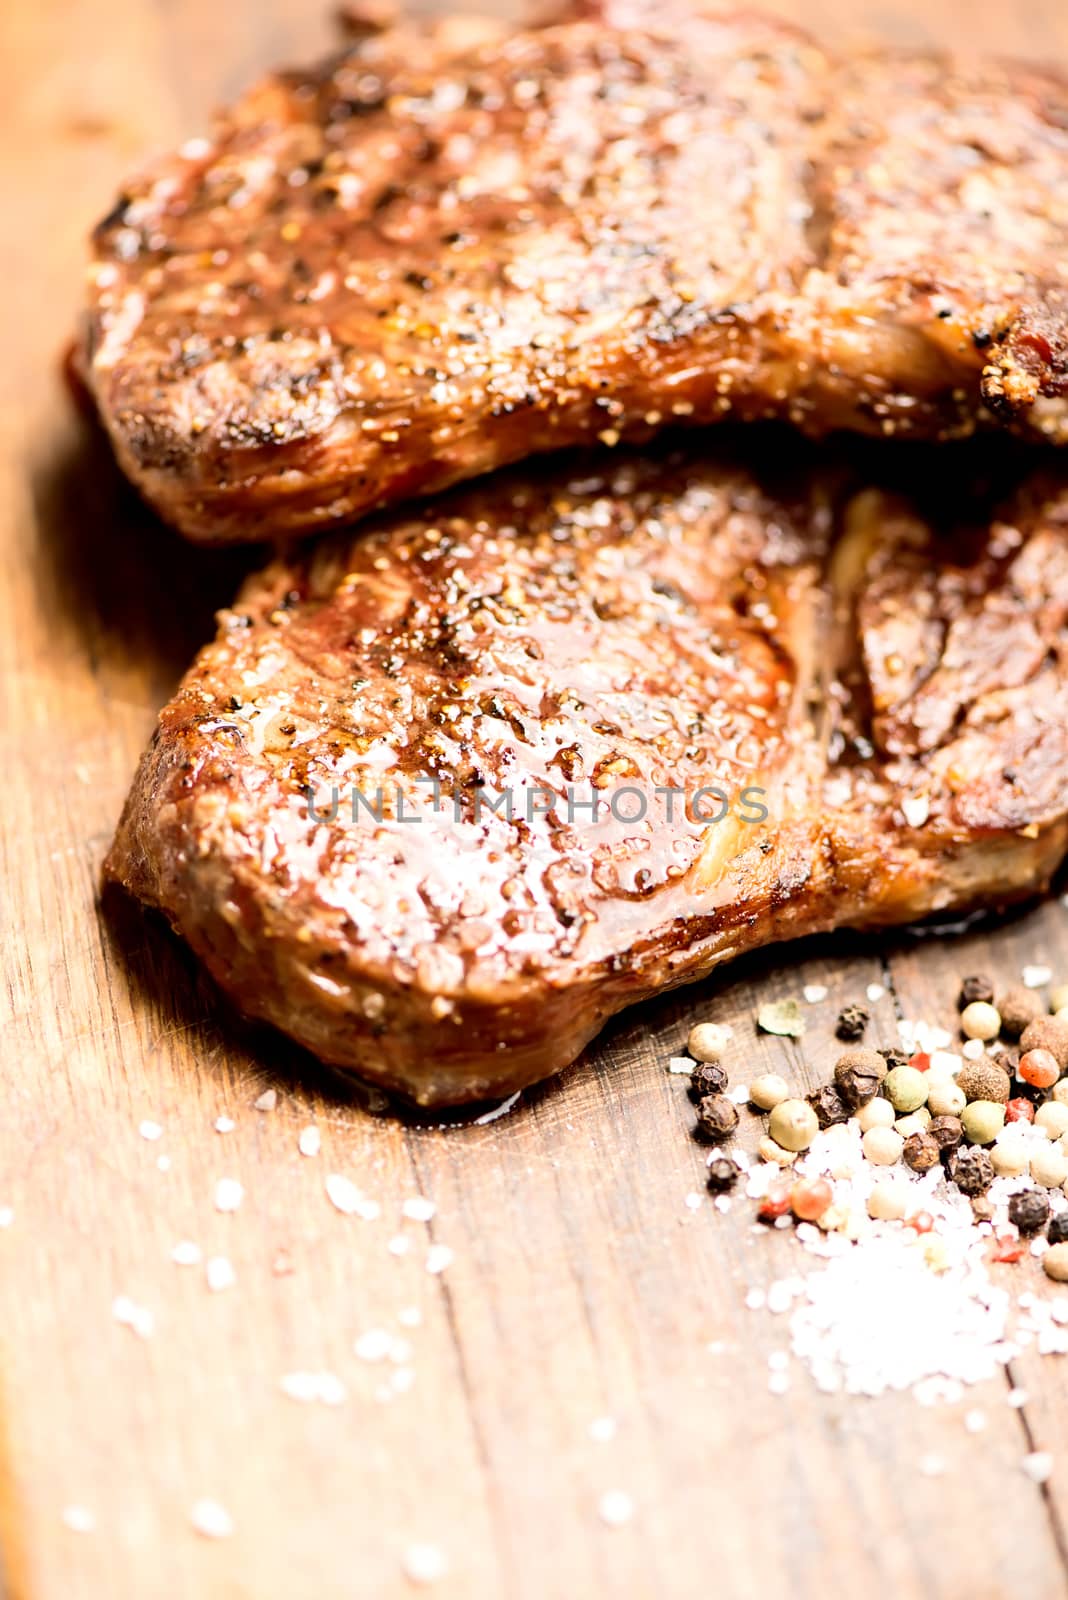 Succulent thick juicy portions of grilled steaks on an old wooden board with salt and pepper